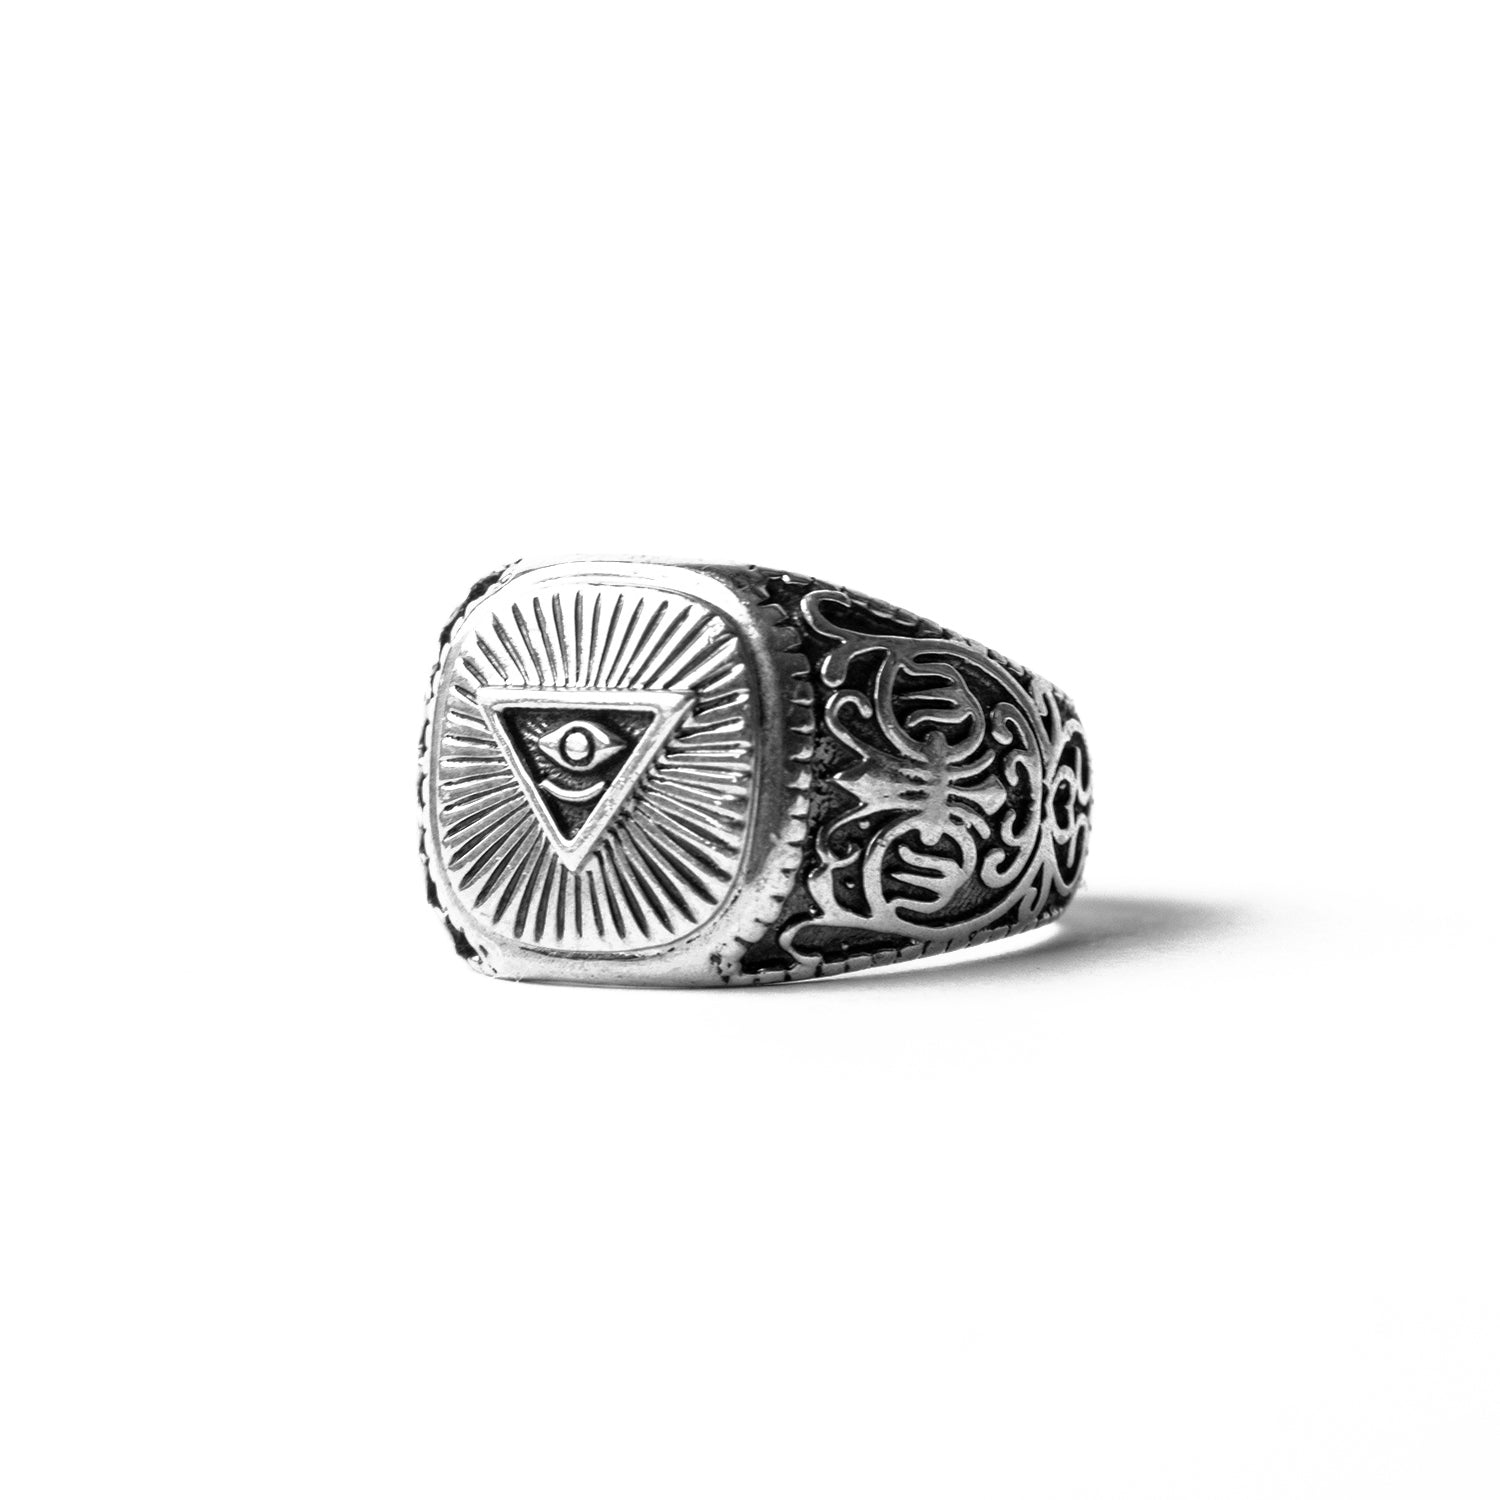 The Eye of Providence Ring in 925 Sterling silver